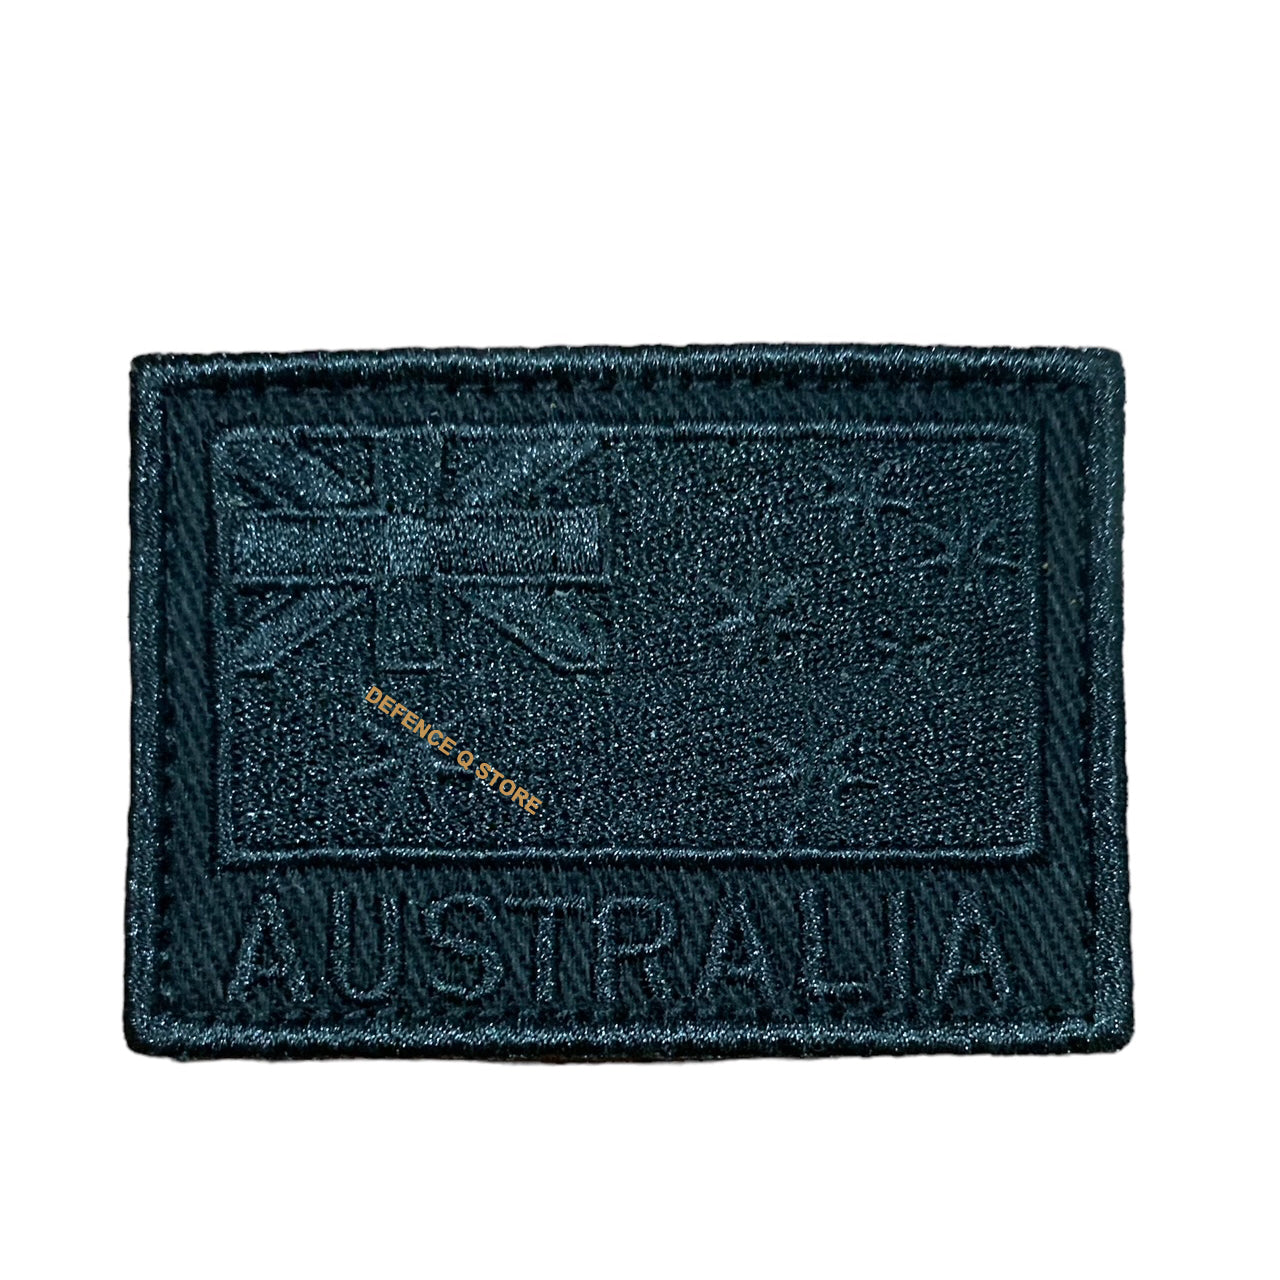 Experience the bold and powerful ANF Patch Black On Black 7x5cm! Perfect for adorning police tactical vests, this patch features a durable Velcro backing and measures 7cm x 5cm. Show off your style and support with this must-have accessory. www.defenceqstore.com.au